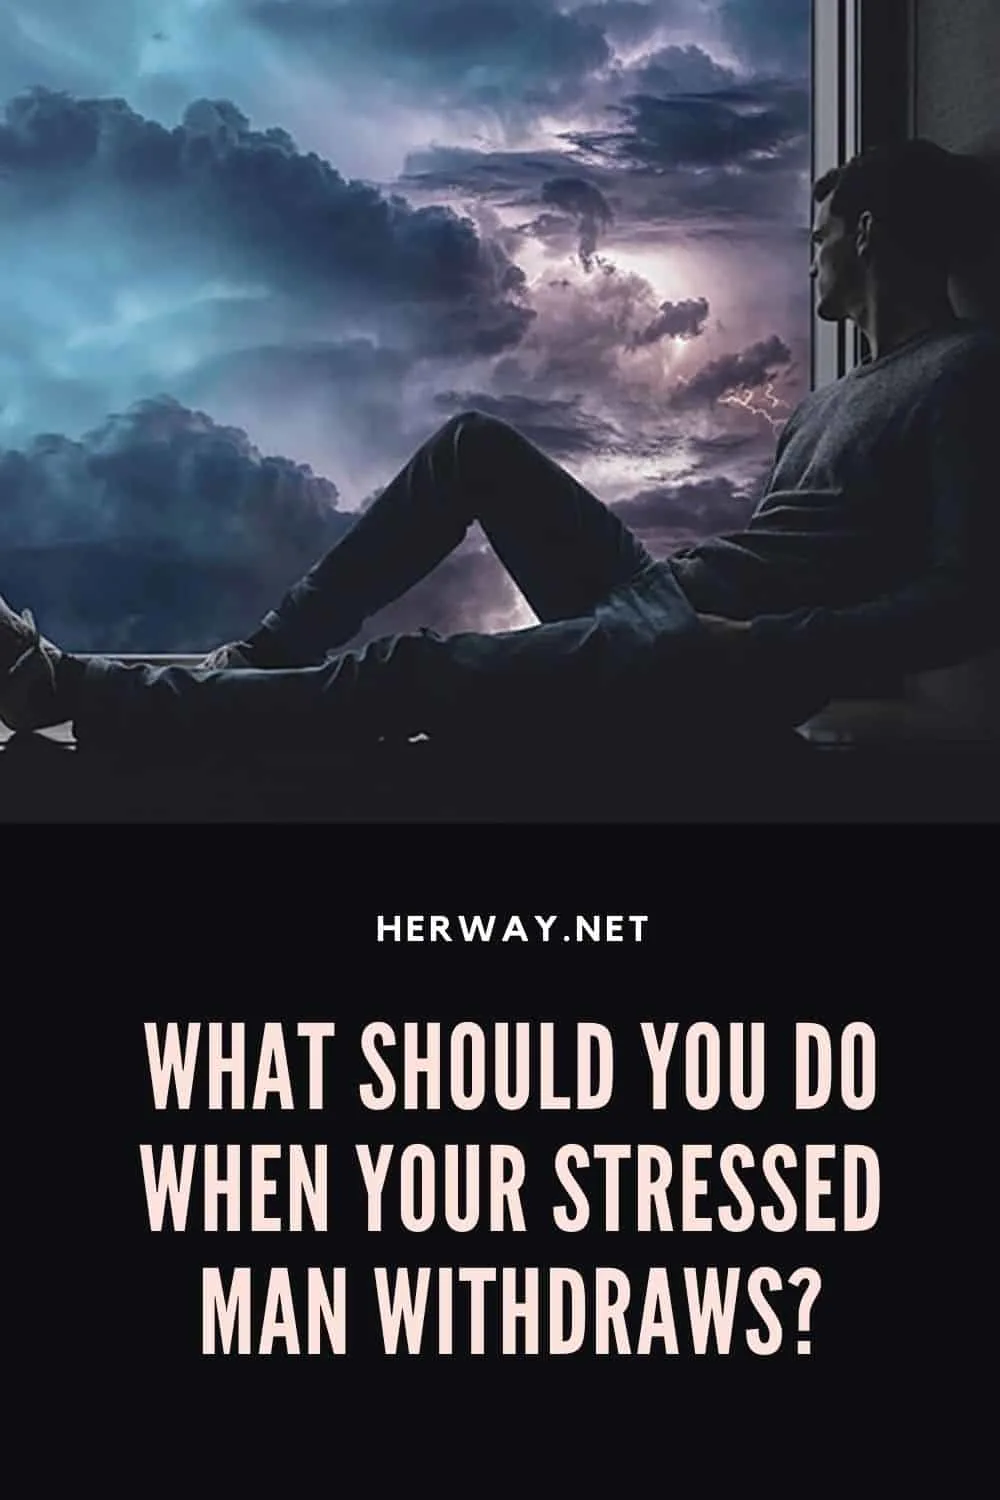 What Should You Do When Your Stressed Man Withdraws?